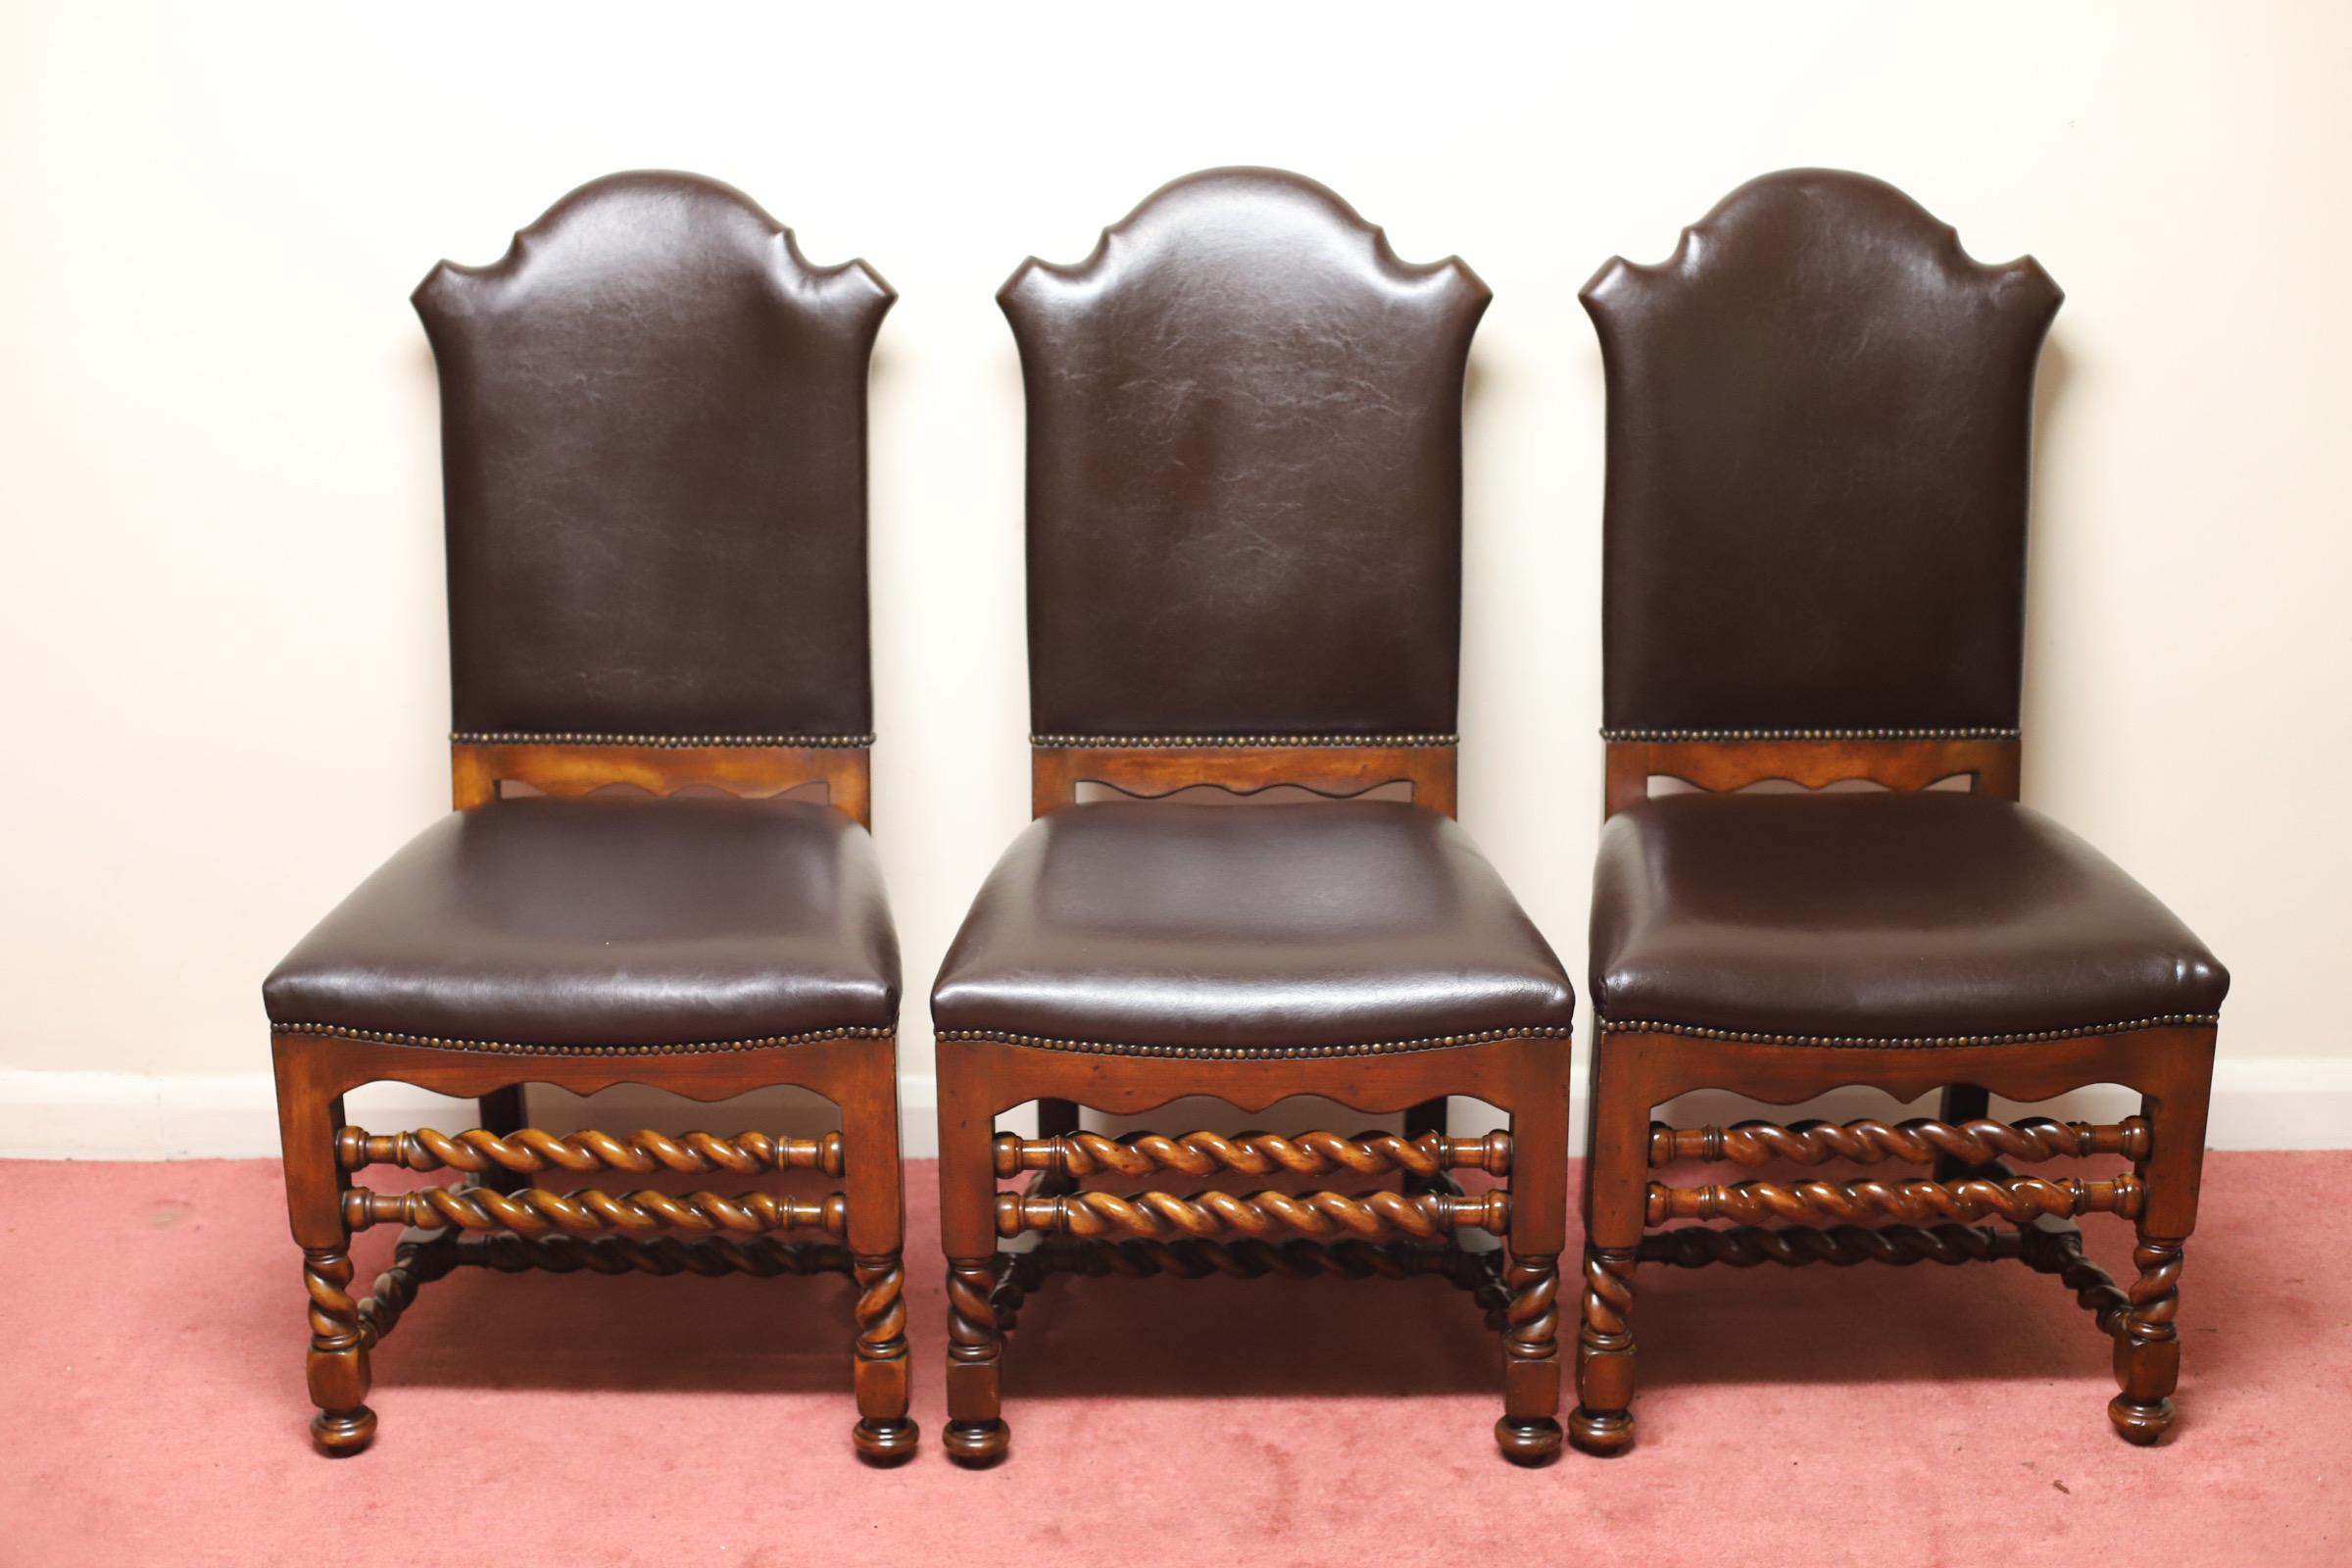 Fine set of 6 modern spiral turned chestnut dining chairs by Theodore Alexander.
The seats and backs have soft brown leather upholstery - with fire retardant safety labels attached under soft base.
Chairs have no defects, may show slight traces of